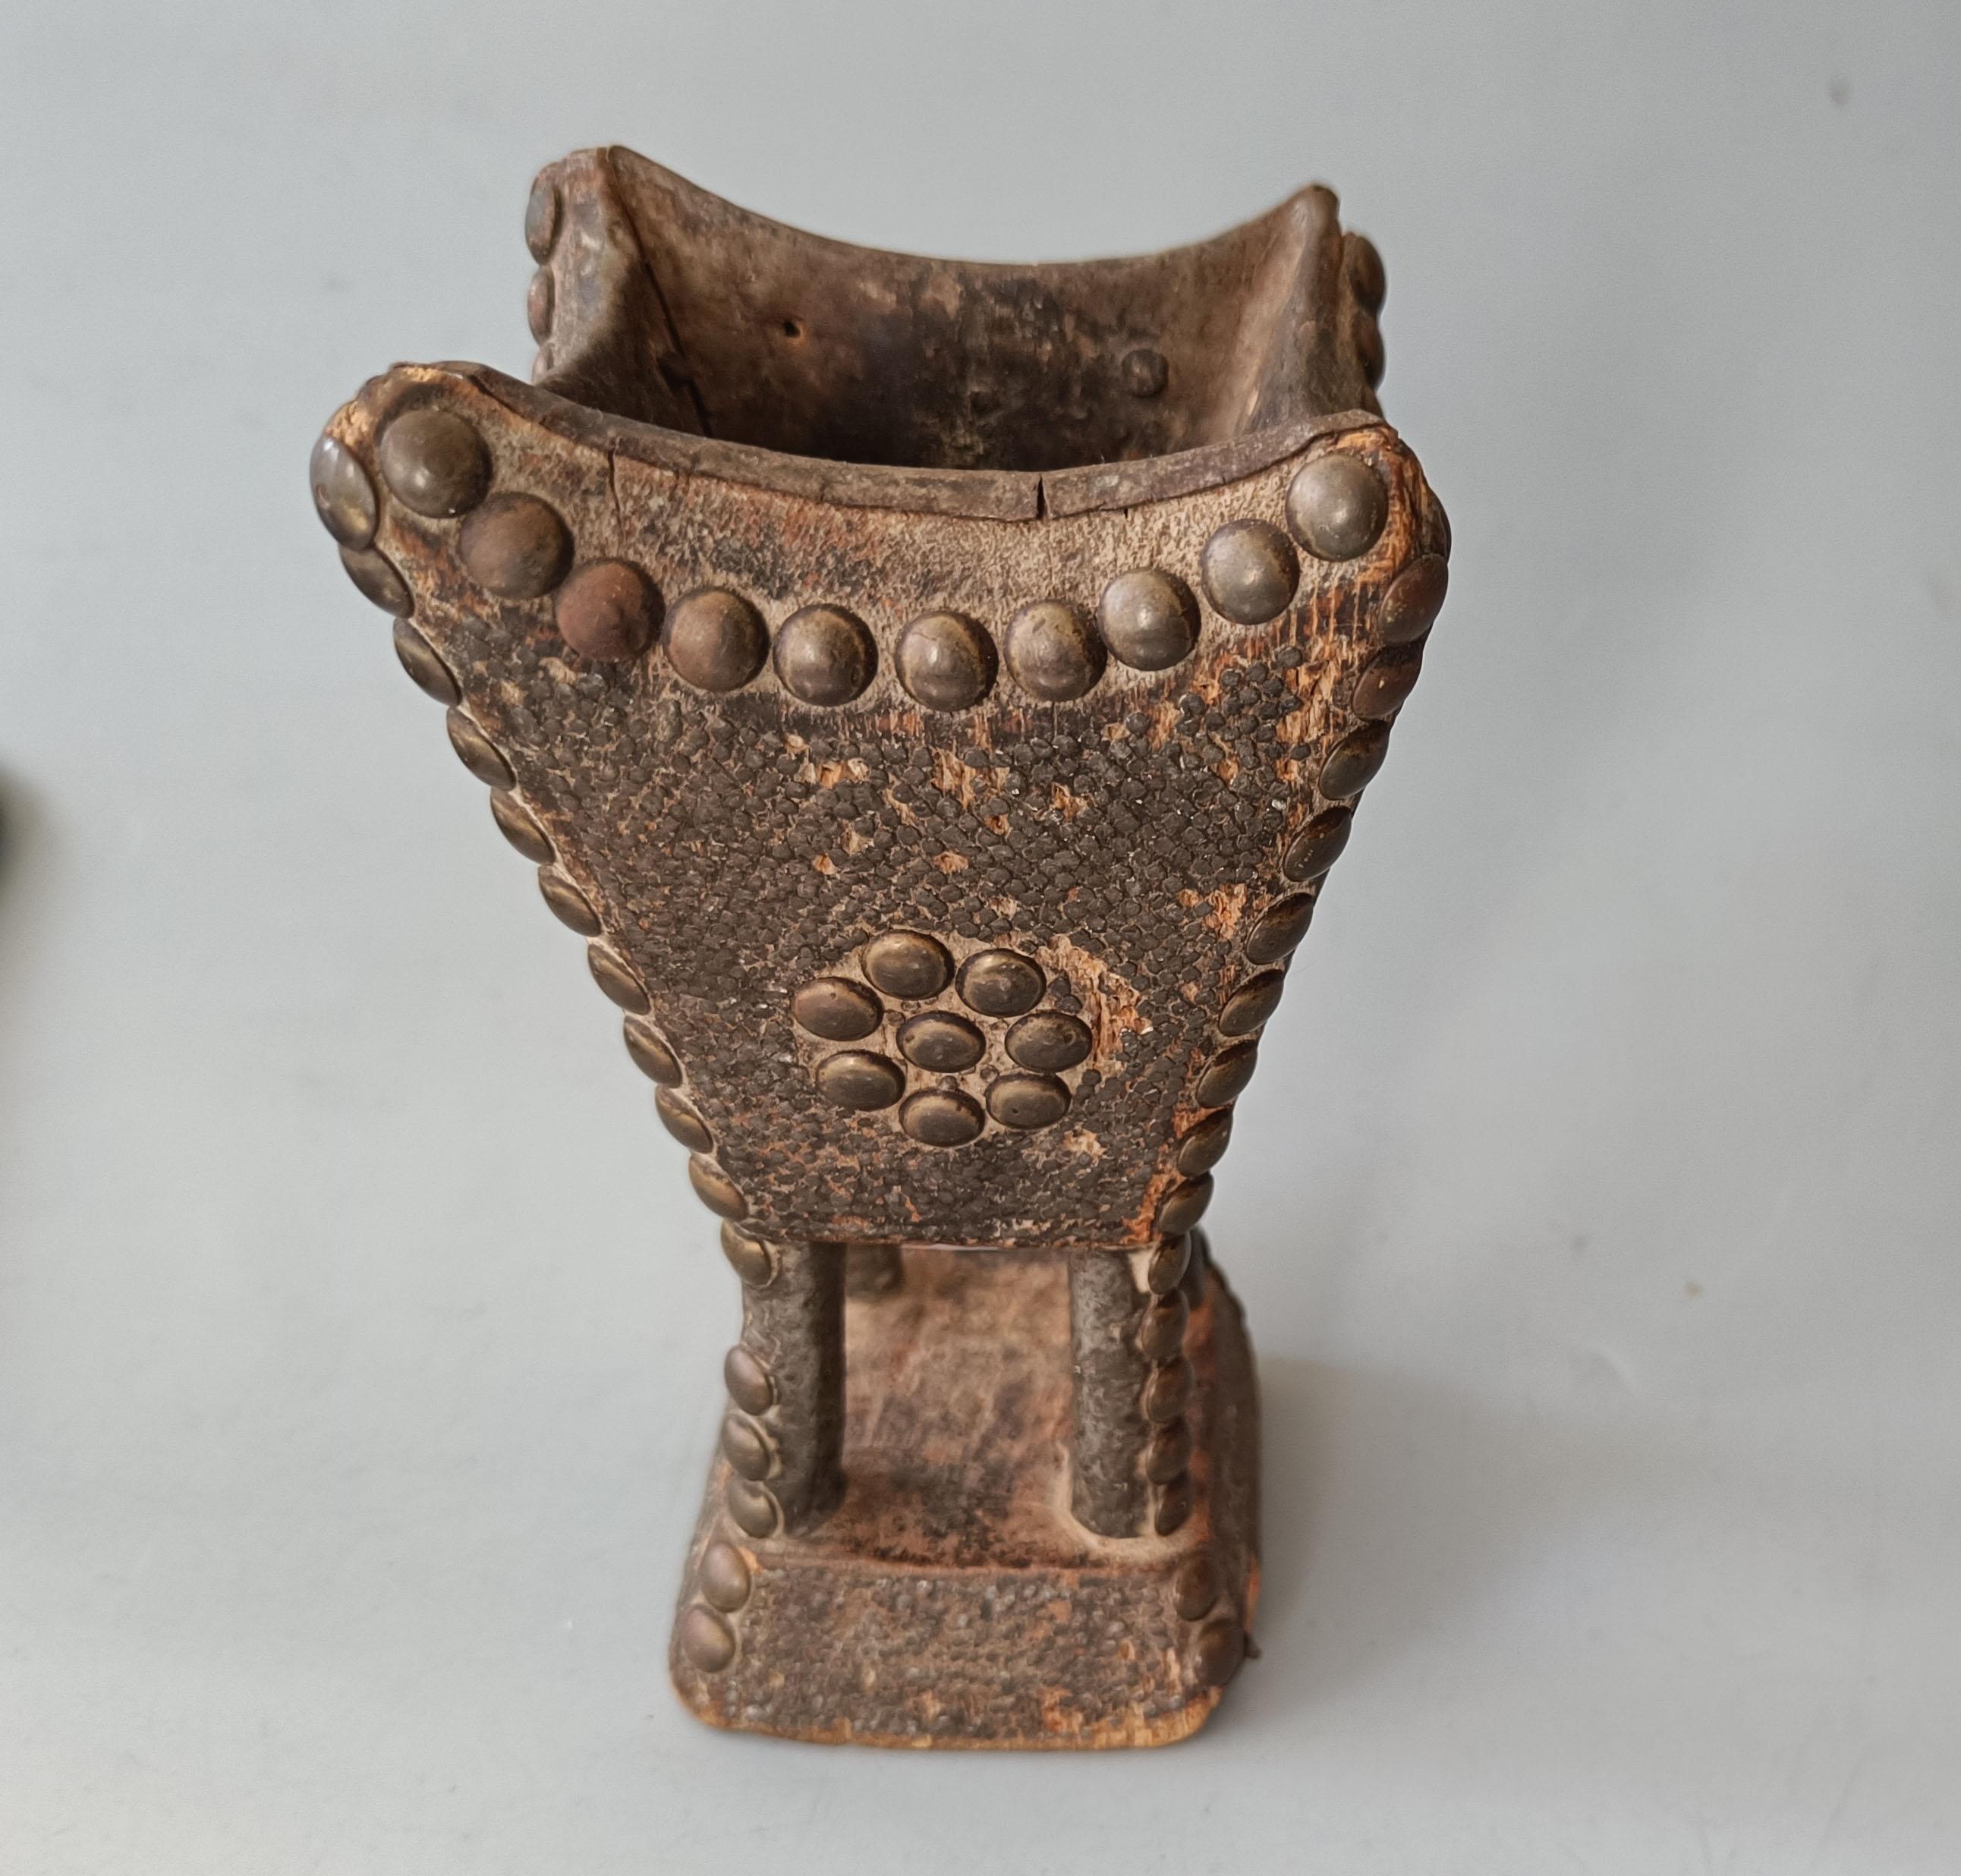 Rare old 19th century Bedouin Mabkhara Incense burner
Carved wood the surface covered with many small metal studs emulating  snake skin with larger brass studs and metal liner
A superb early 19th Century example 
Height 17 cm

 
 
 